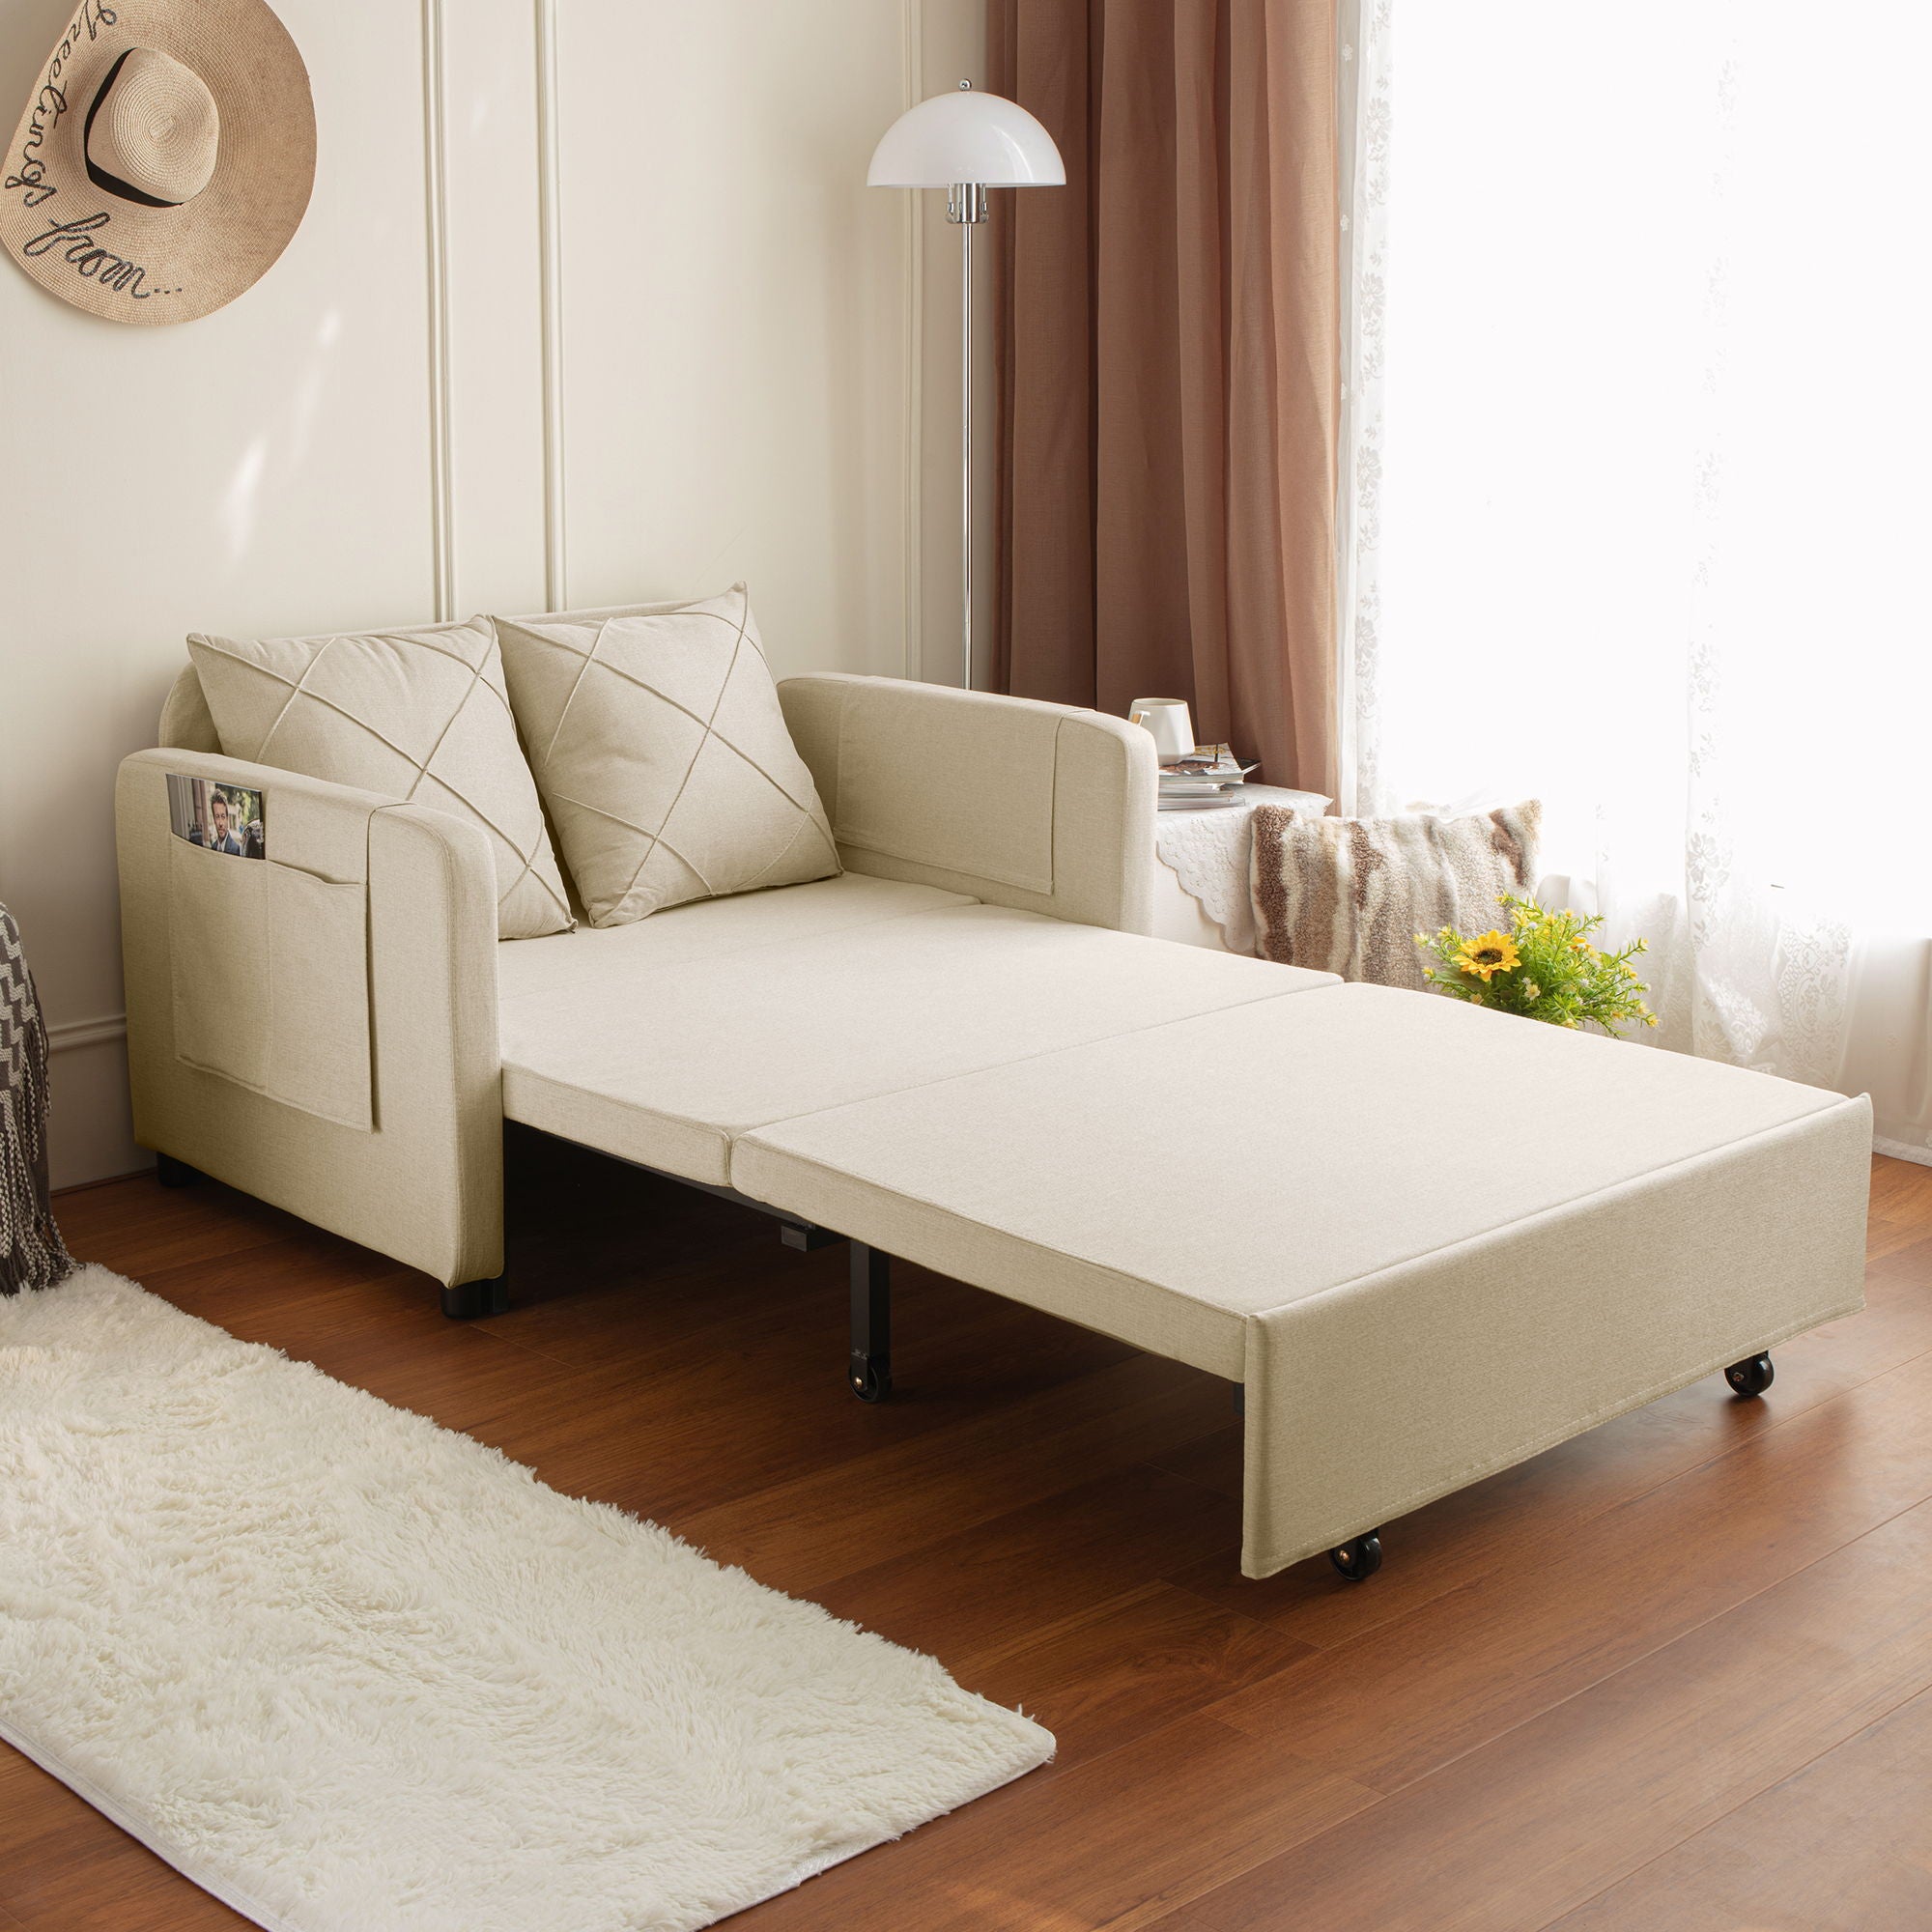 Modern Love Seat Futon Sofa Bed With Headboard, Linen Love Seat Couch, Pull Out Sofa Bed With 2 Pillows & 2 Sides Pockets For Any Small Spaces - Beige